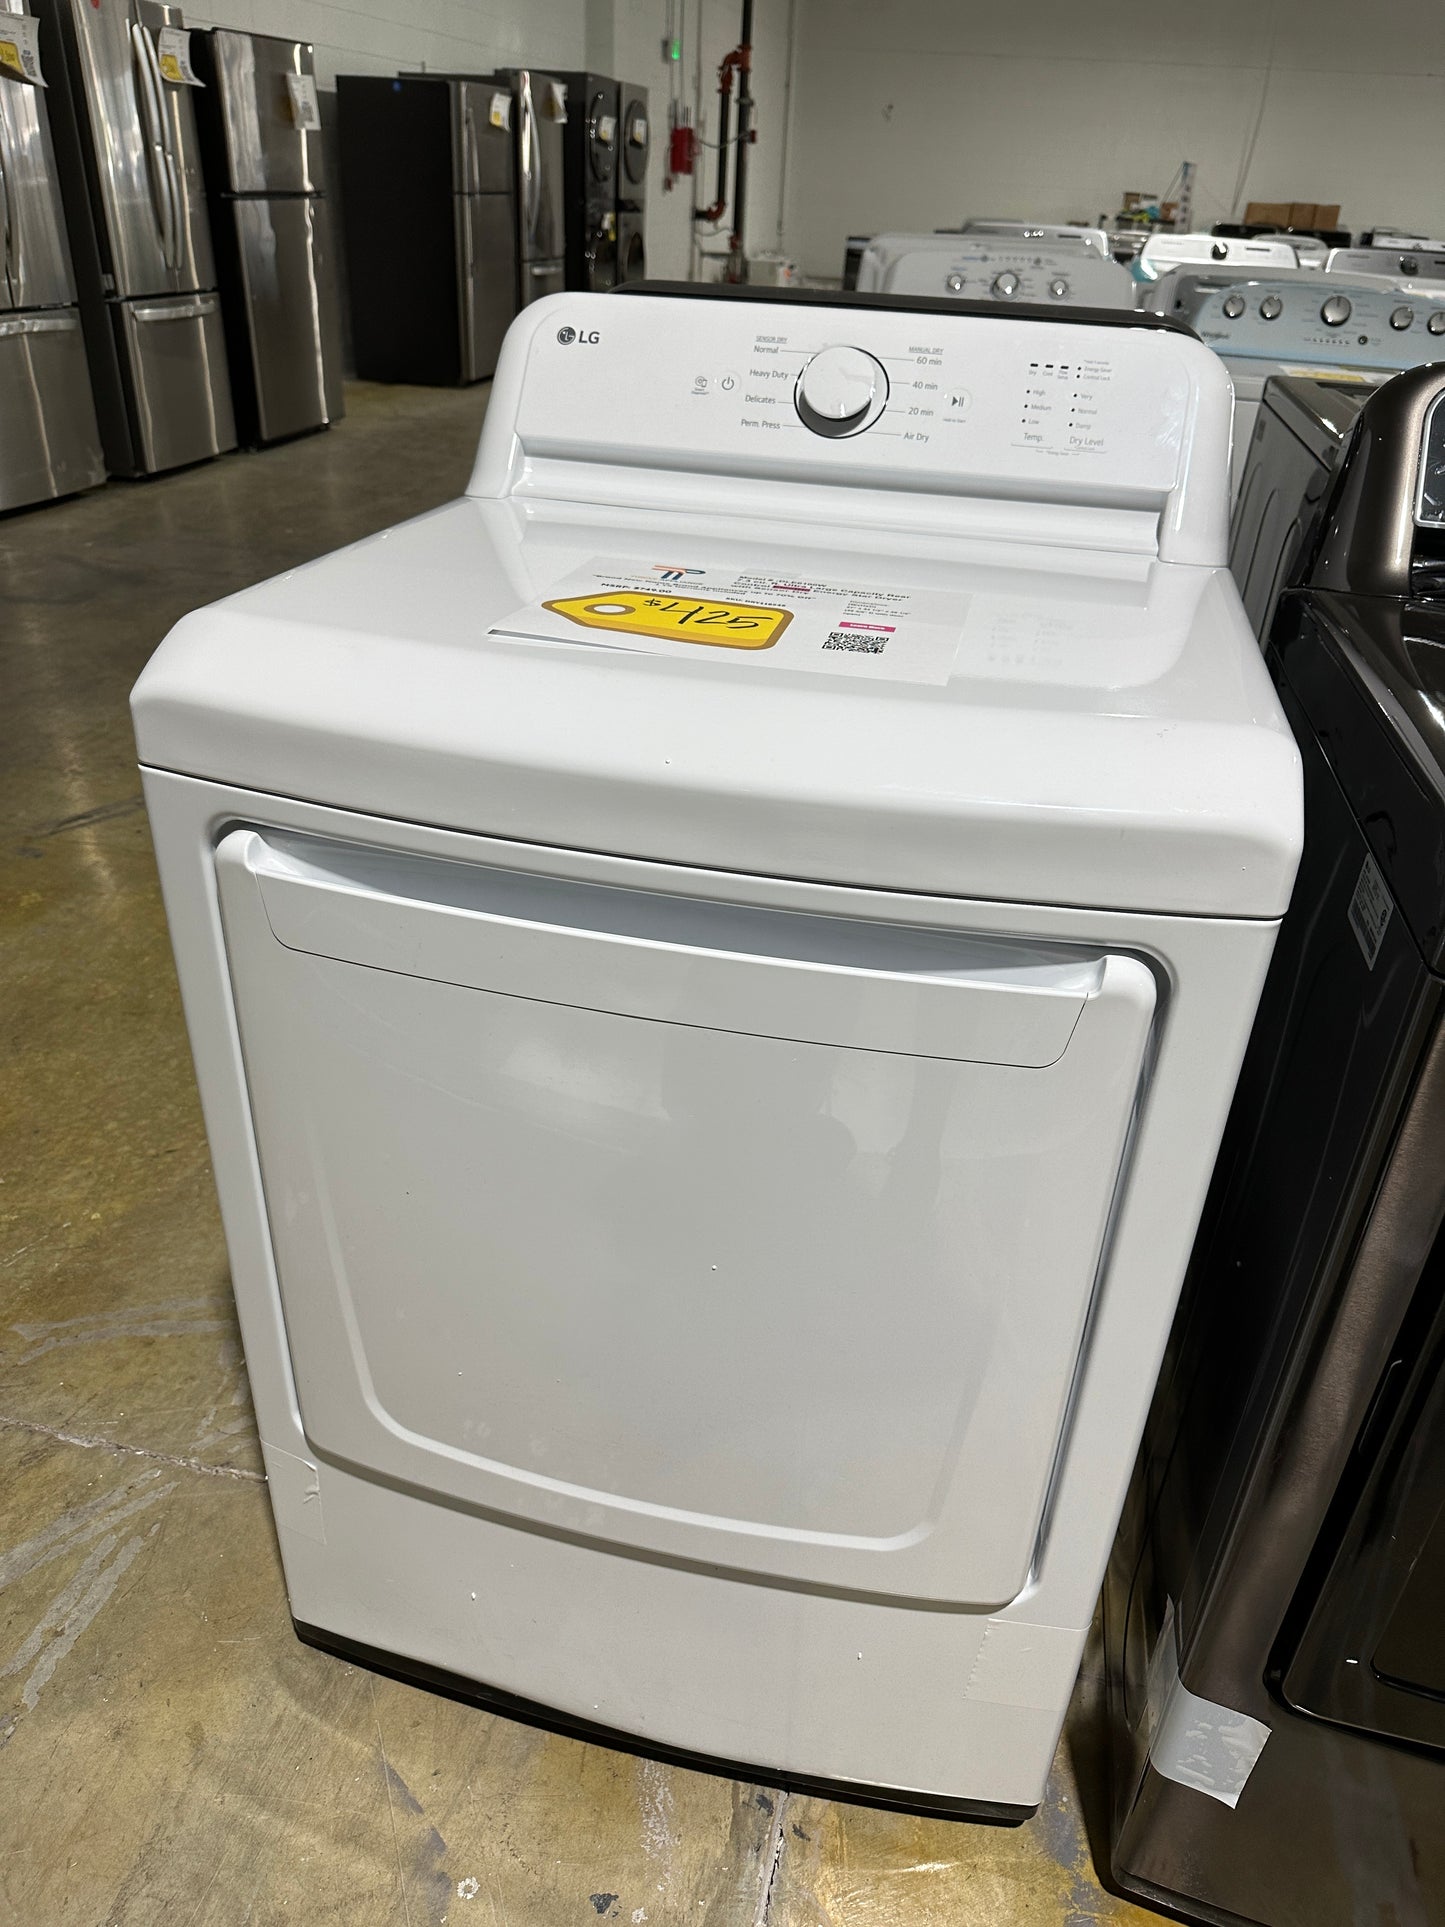 LG - 7.3 Cu. Ft. Smart Electric Dryer with Sensor Dry - White  MODEL: DLE6100W  DRY11854S